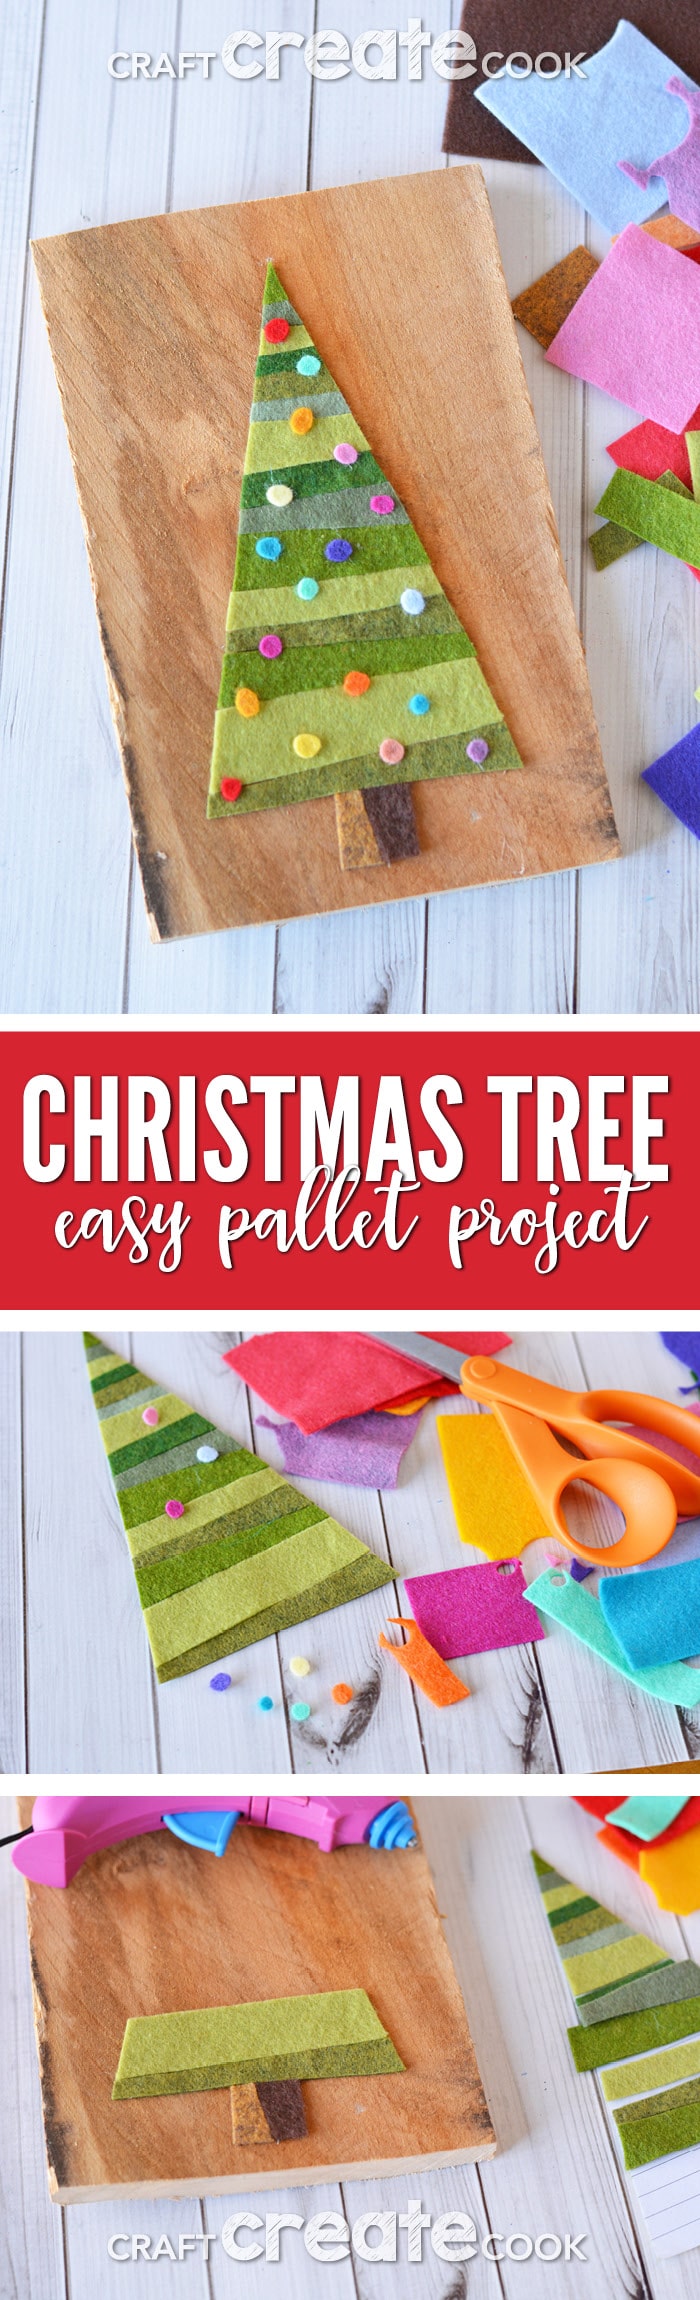 Easy Pallet Christmas Tree - Craft Create Cook